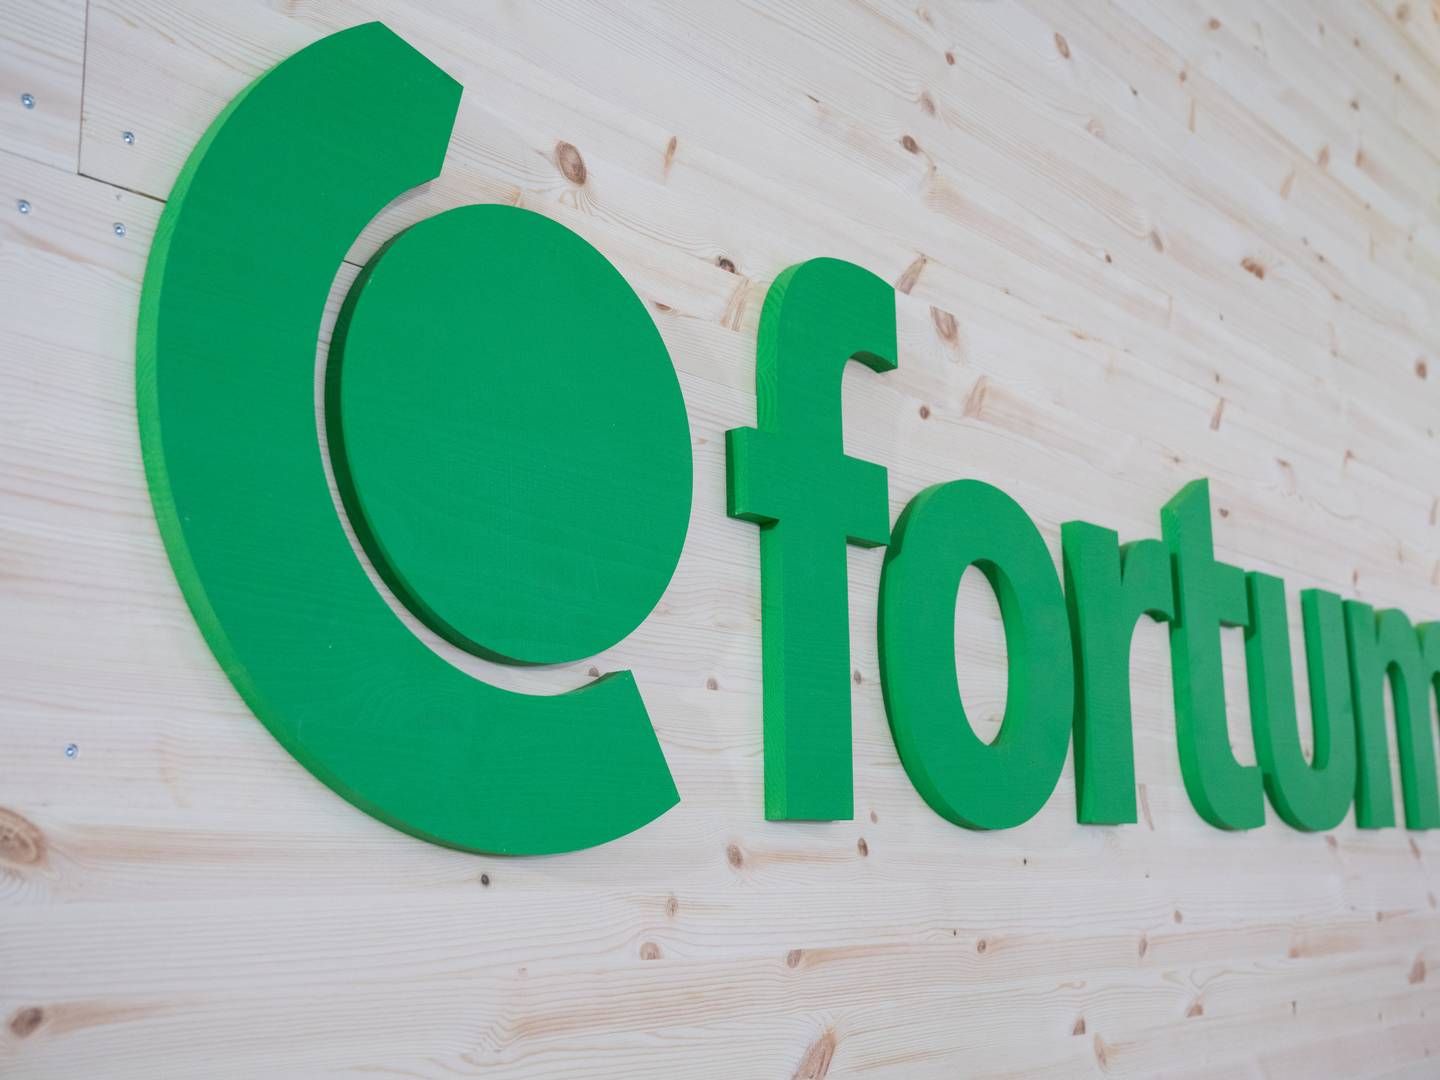 Upon the Russian government's seizure of Fortum's Russian assets, the company has made an official notification of its objection to the act. | Photo: Fortum